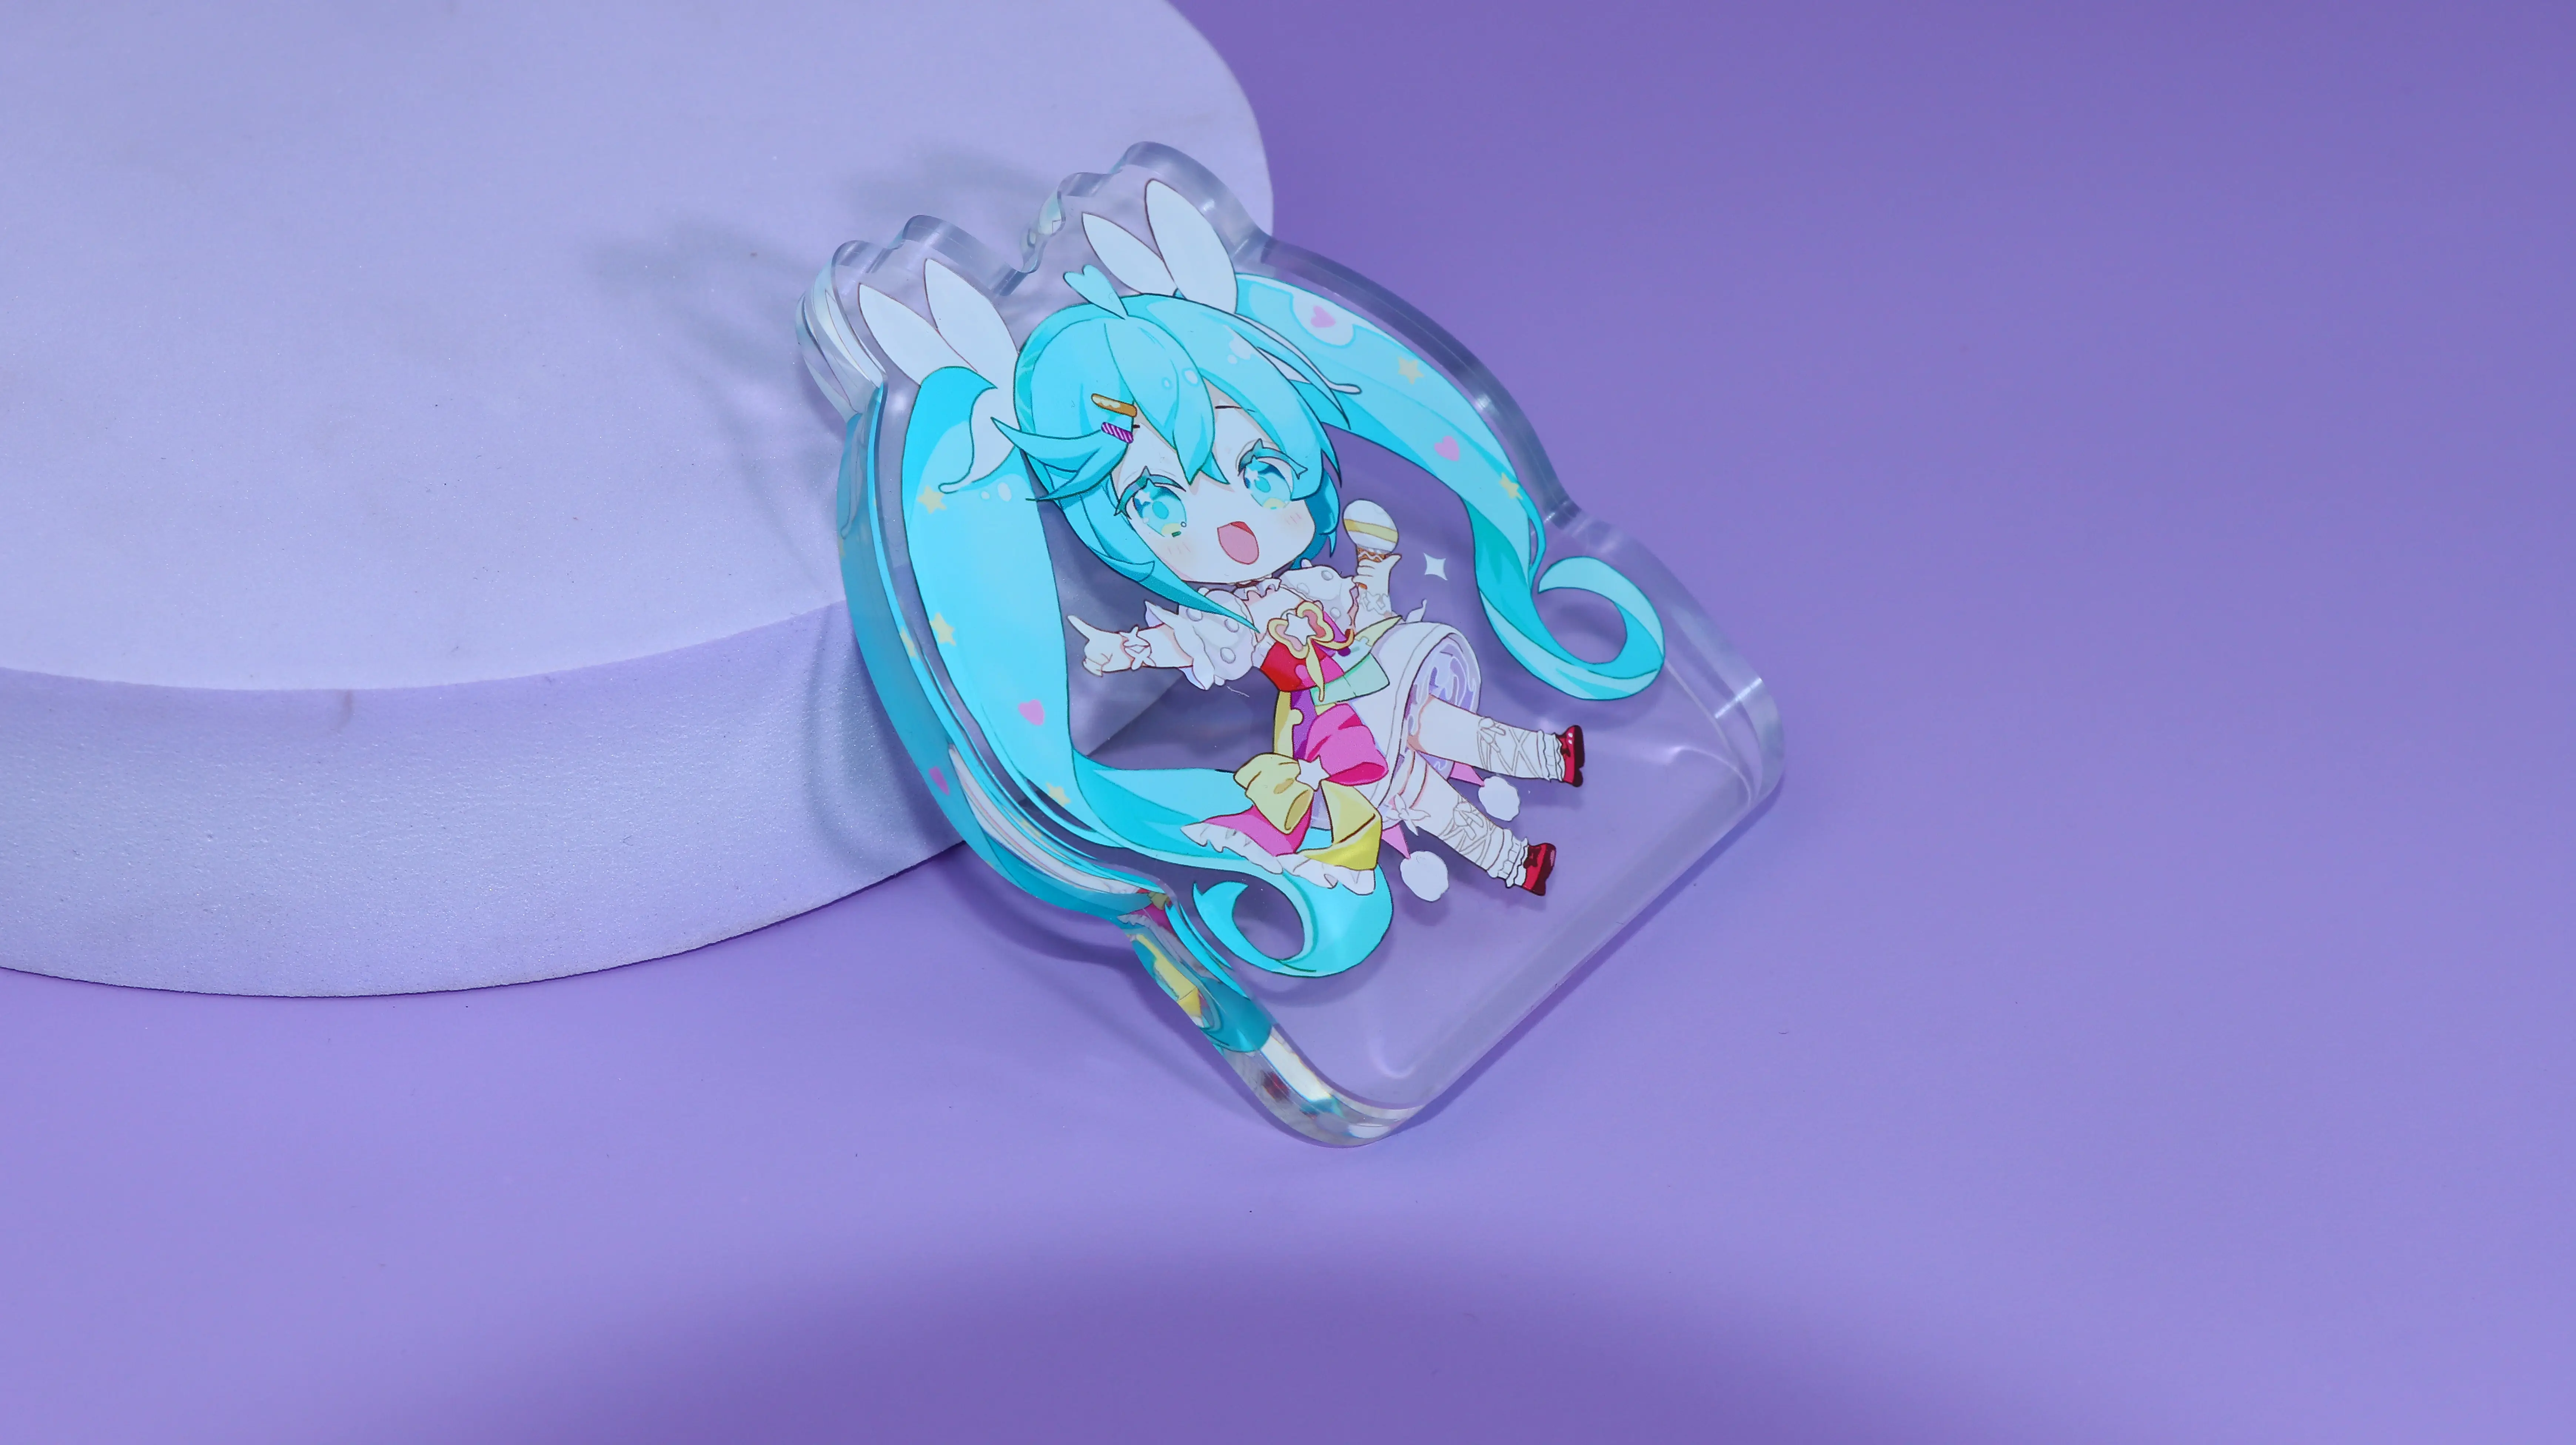 Make Your Own Design Printed Custom Acrylic Keychain Holographic Charms Anime Transparent Key Chain Souvenirs Gift